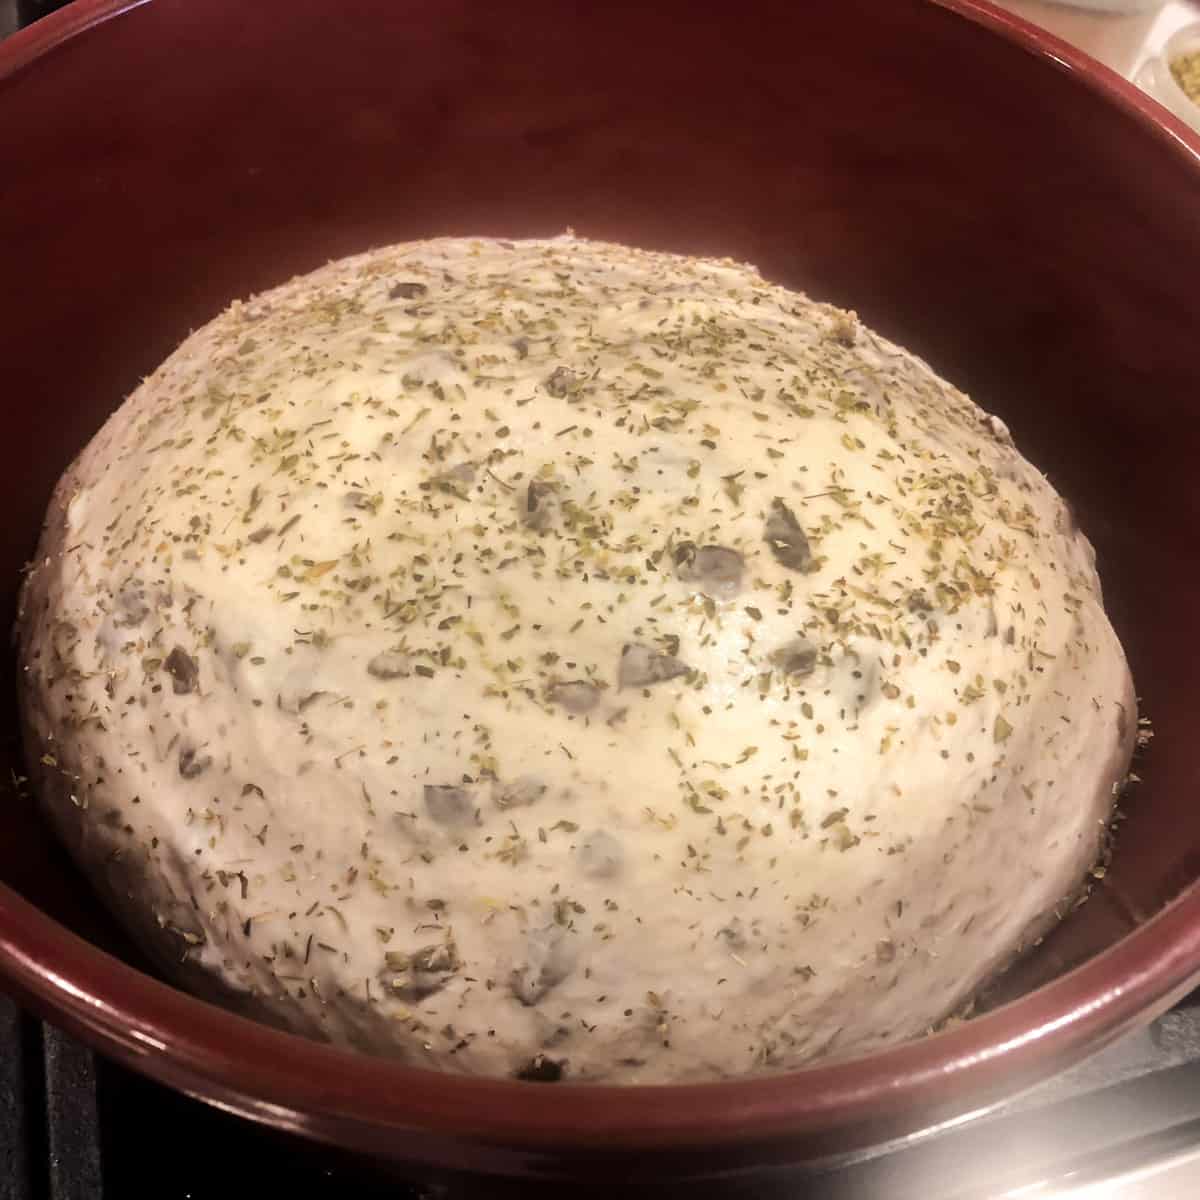 Raw bread dough risen and placed in a dutch oven.